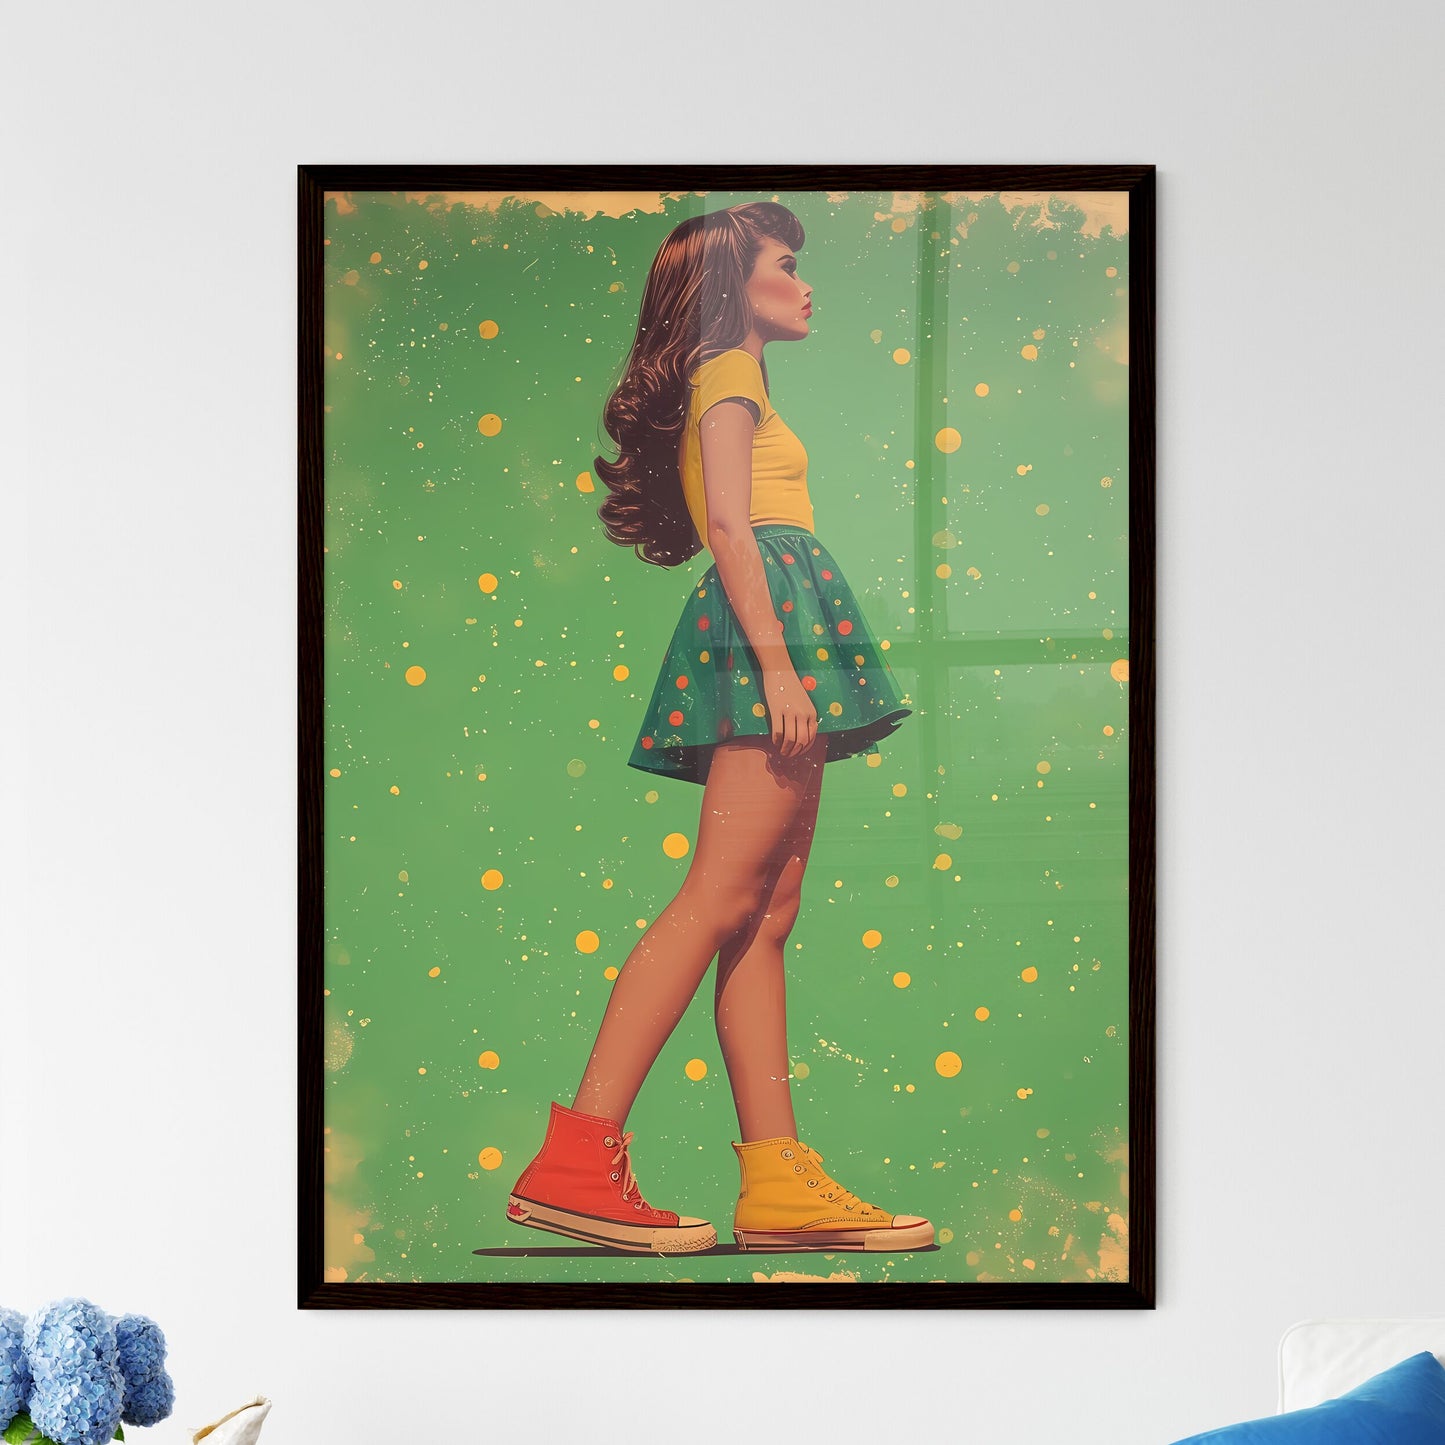 Side profile, illustrative, large outlines, beautiful pin up girl - Art print of a woman in a green skirt and yellow boots Default Title